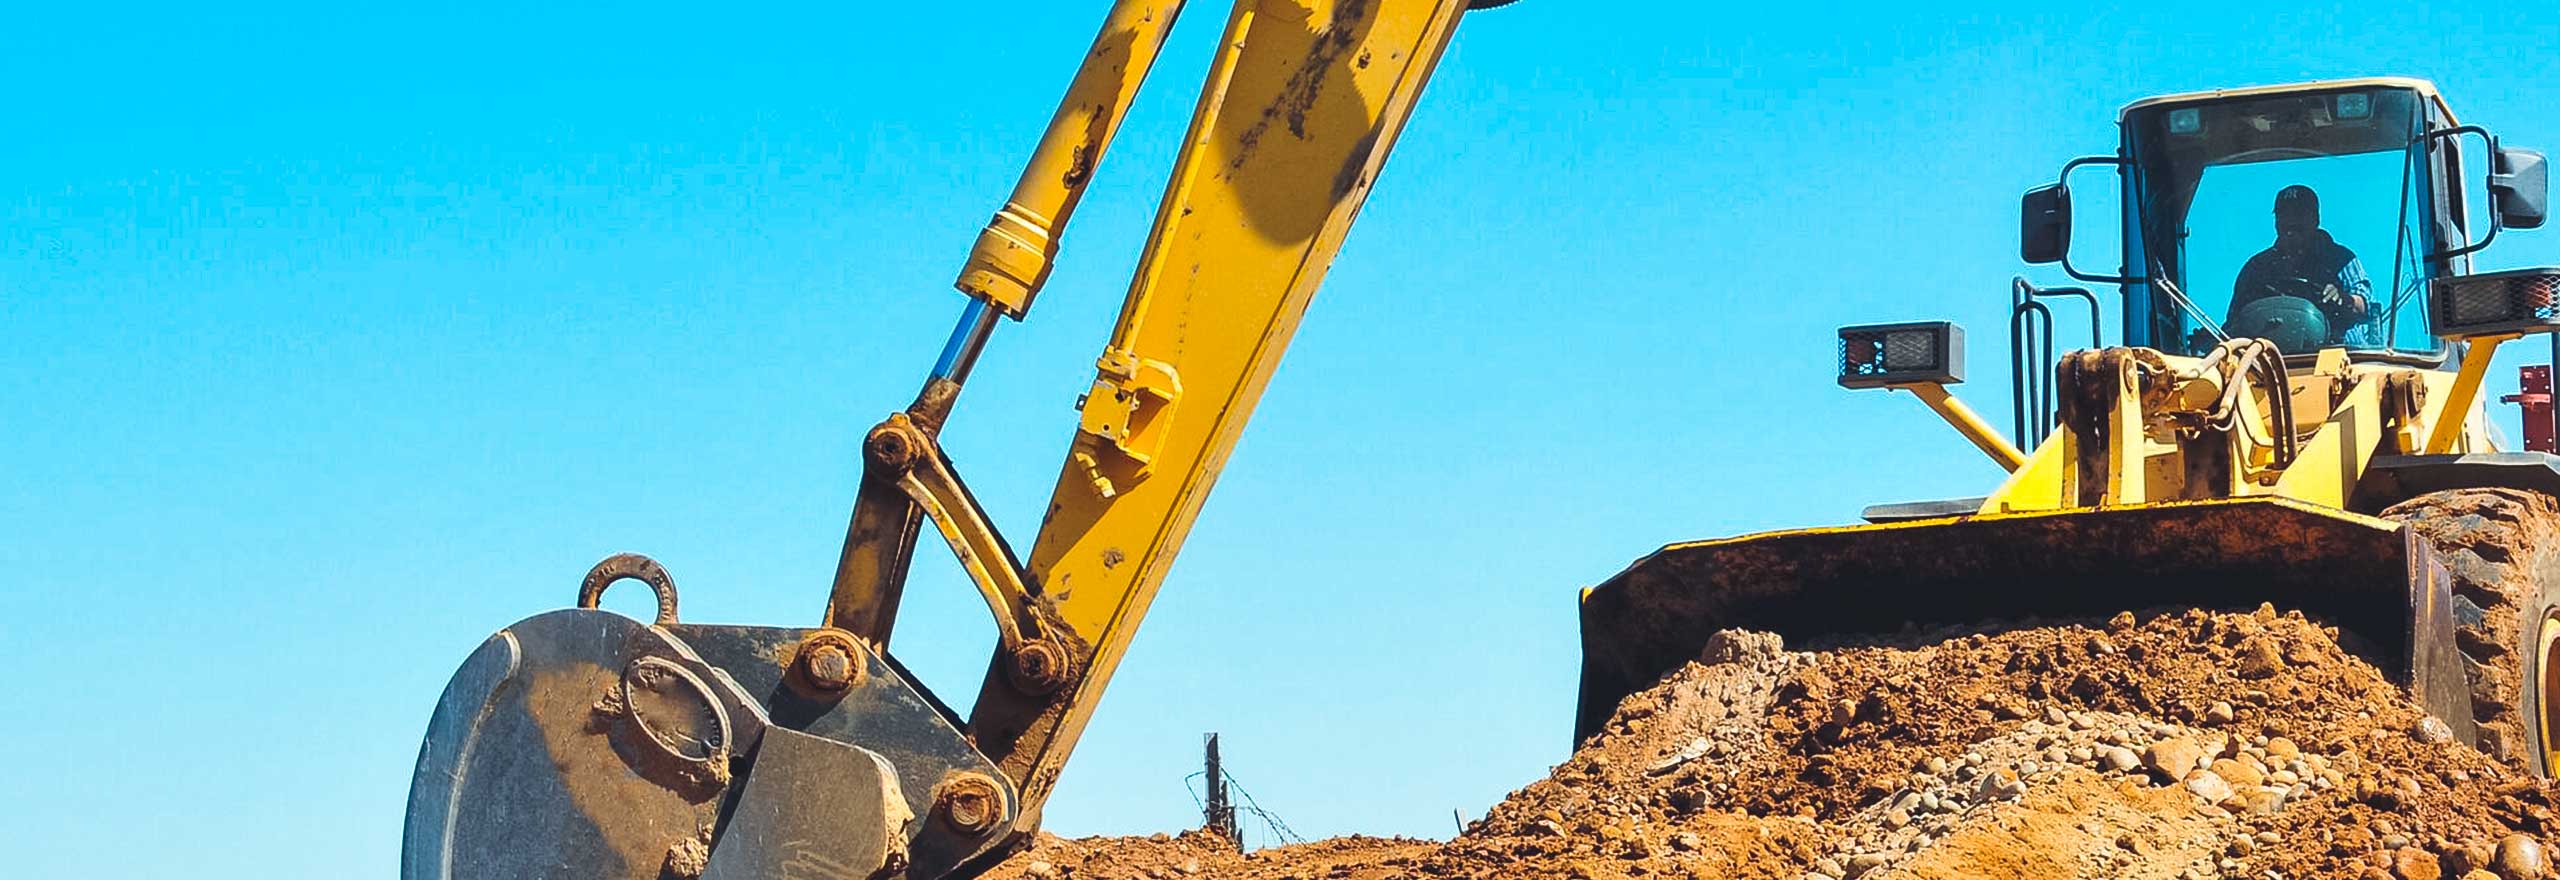 Construction equipment digging at a site